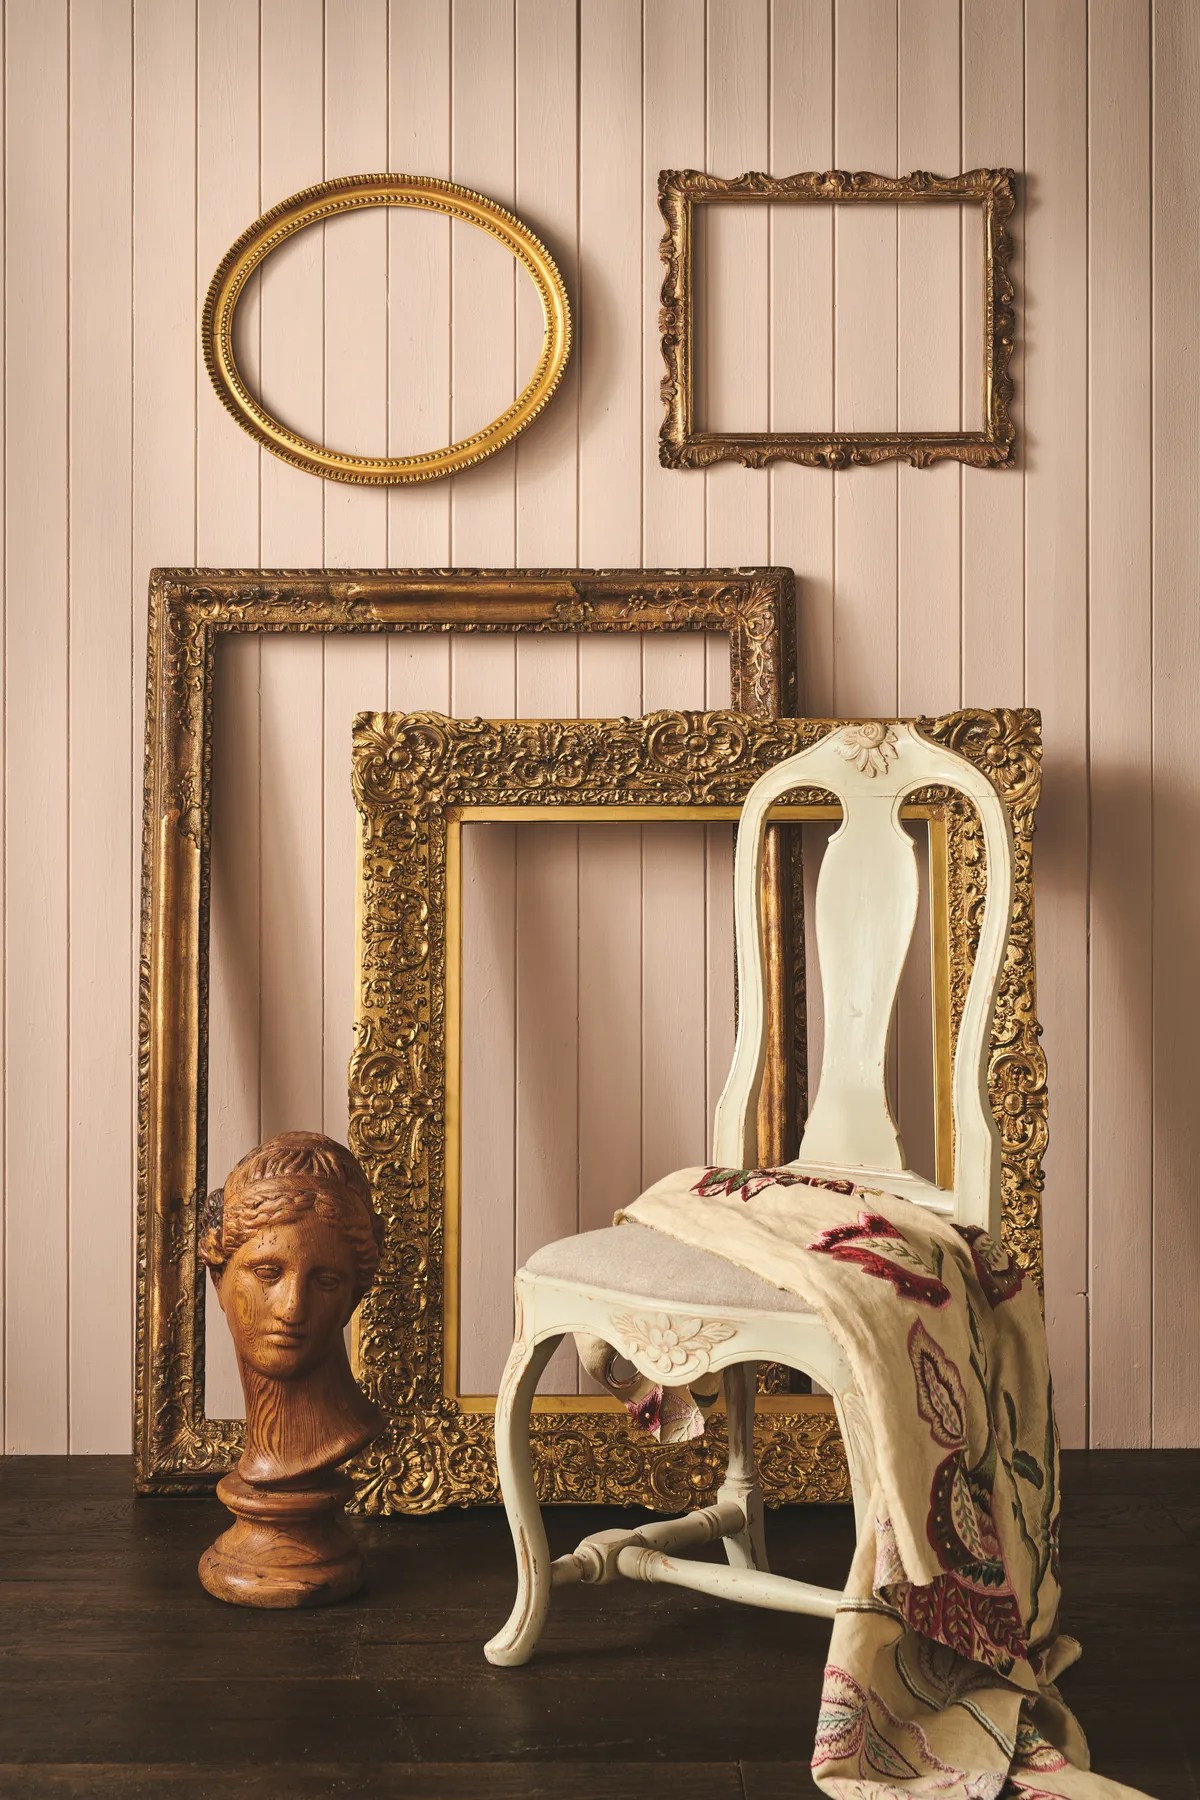 Oversized gold frames leant against a blush pink wall with a washed white chair.